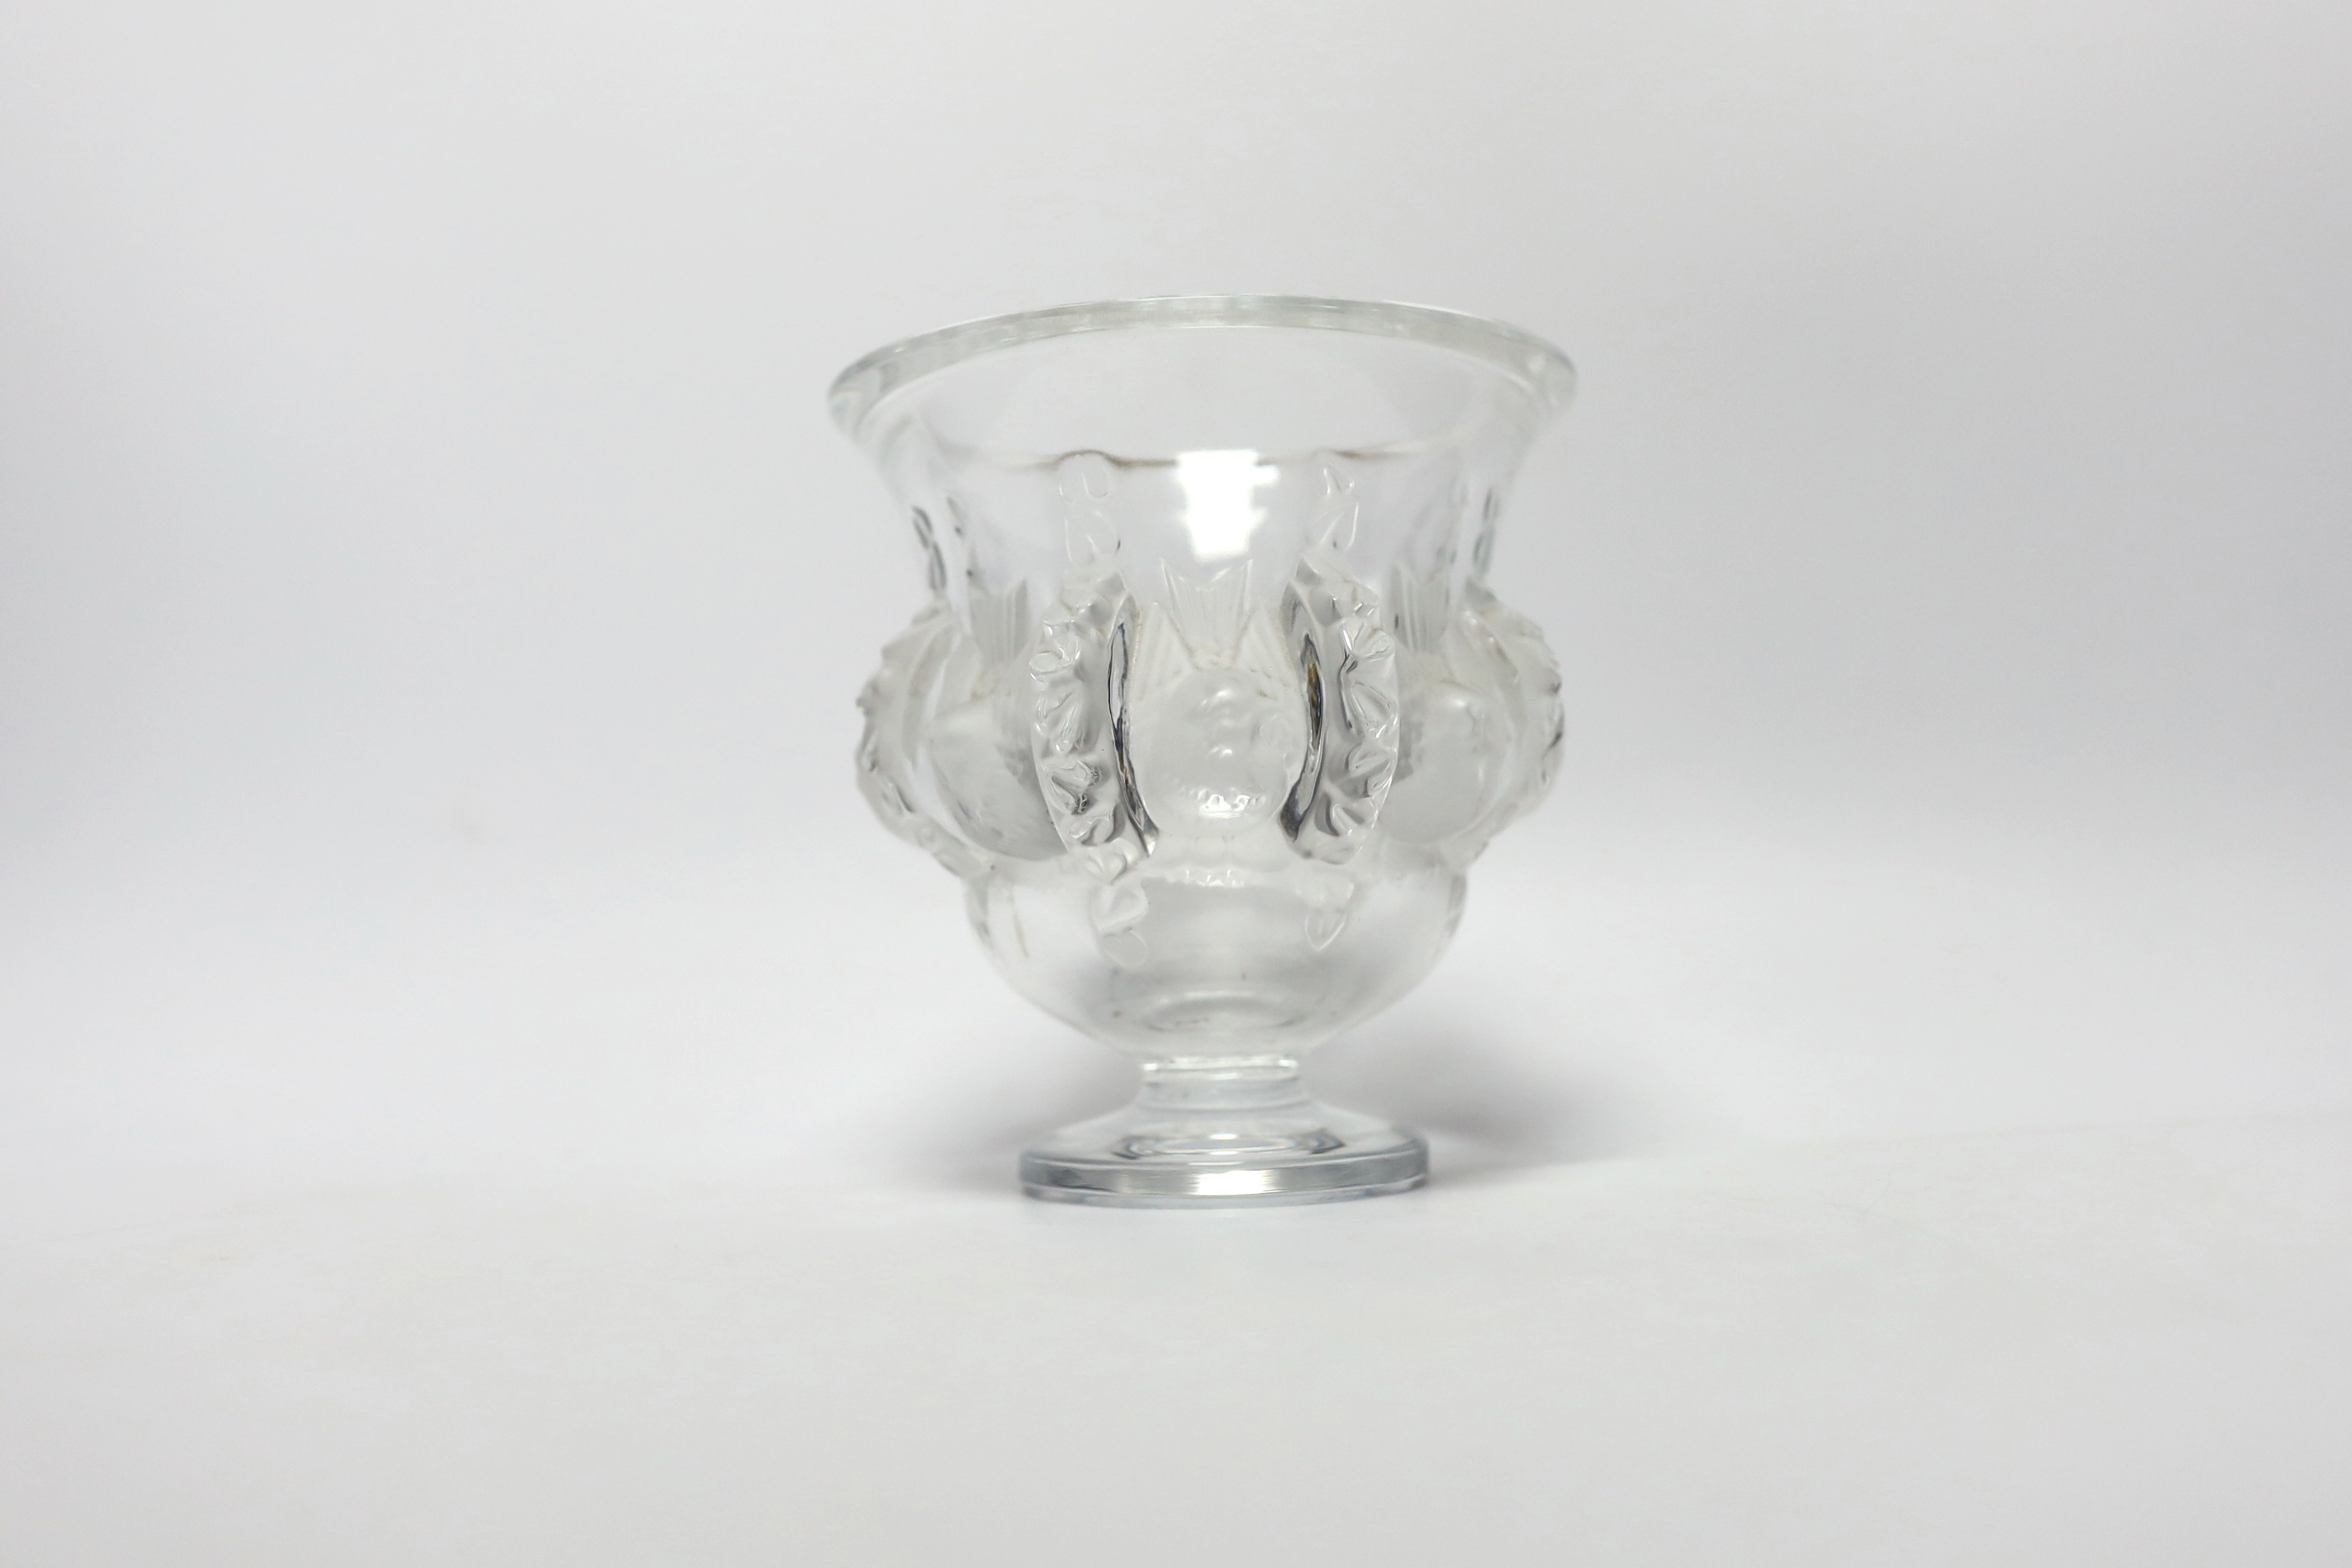 A later 20th century Lalique glass pedestal vase decorated in the Dampierre pattern, engraved - Image 2 of 4